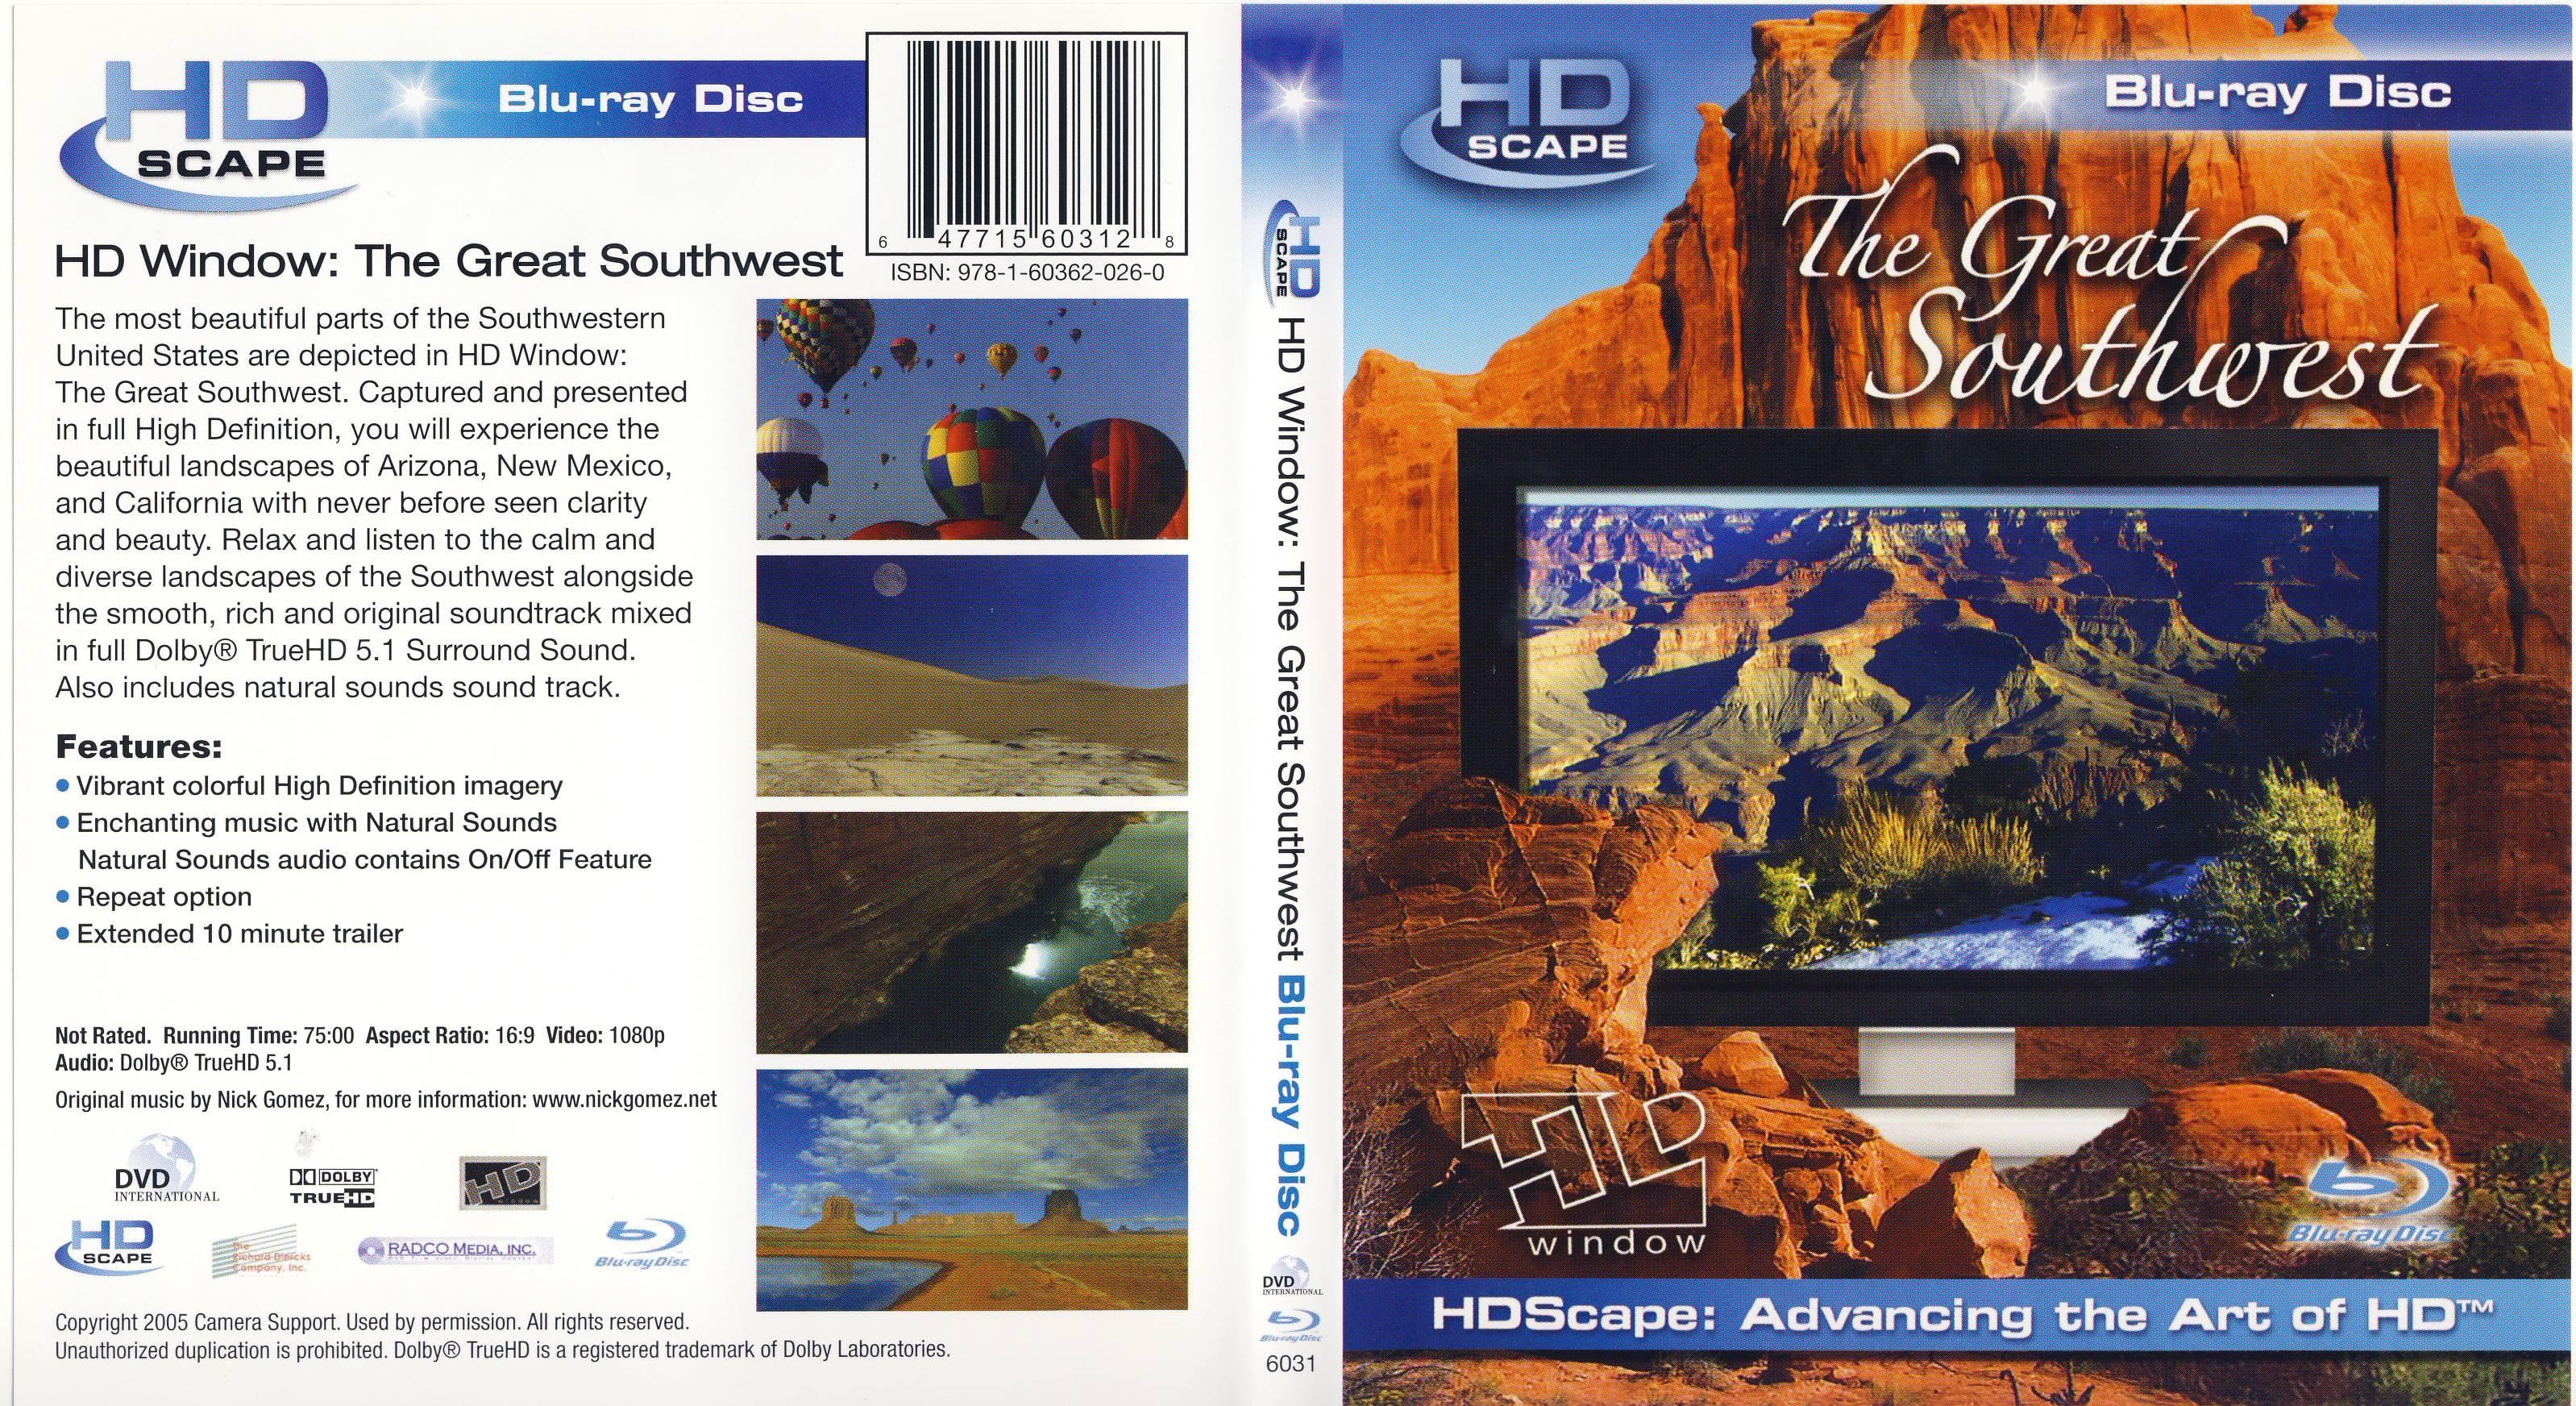 Jaquette DVD The Great Southwest Zone 1 (BLU-RAY)